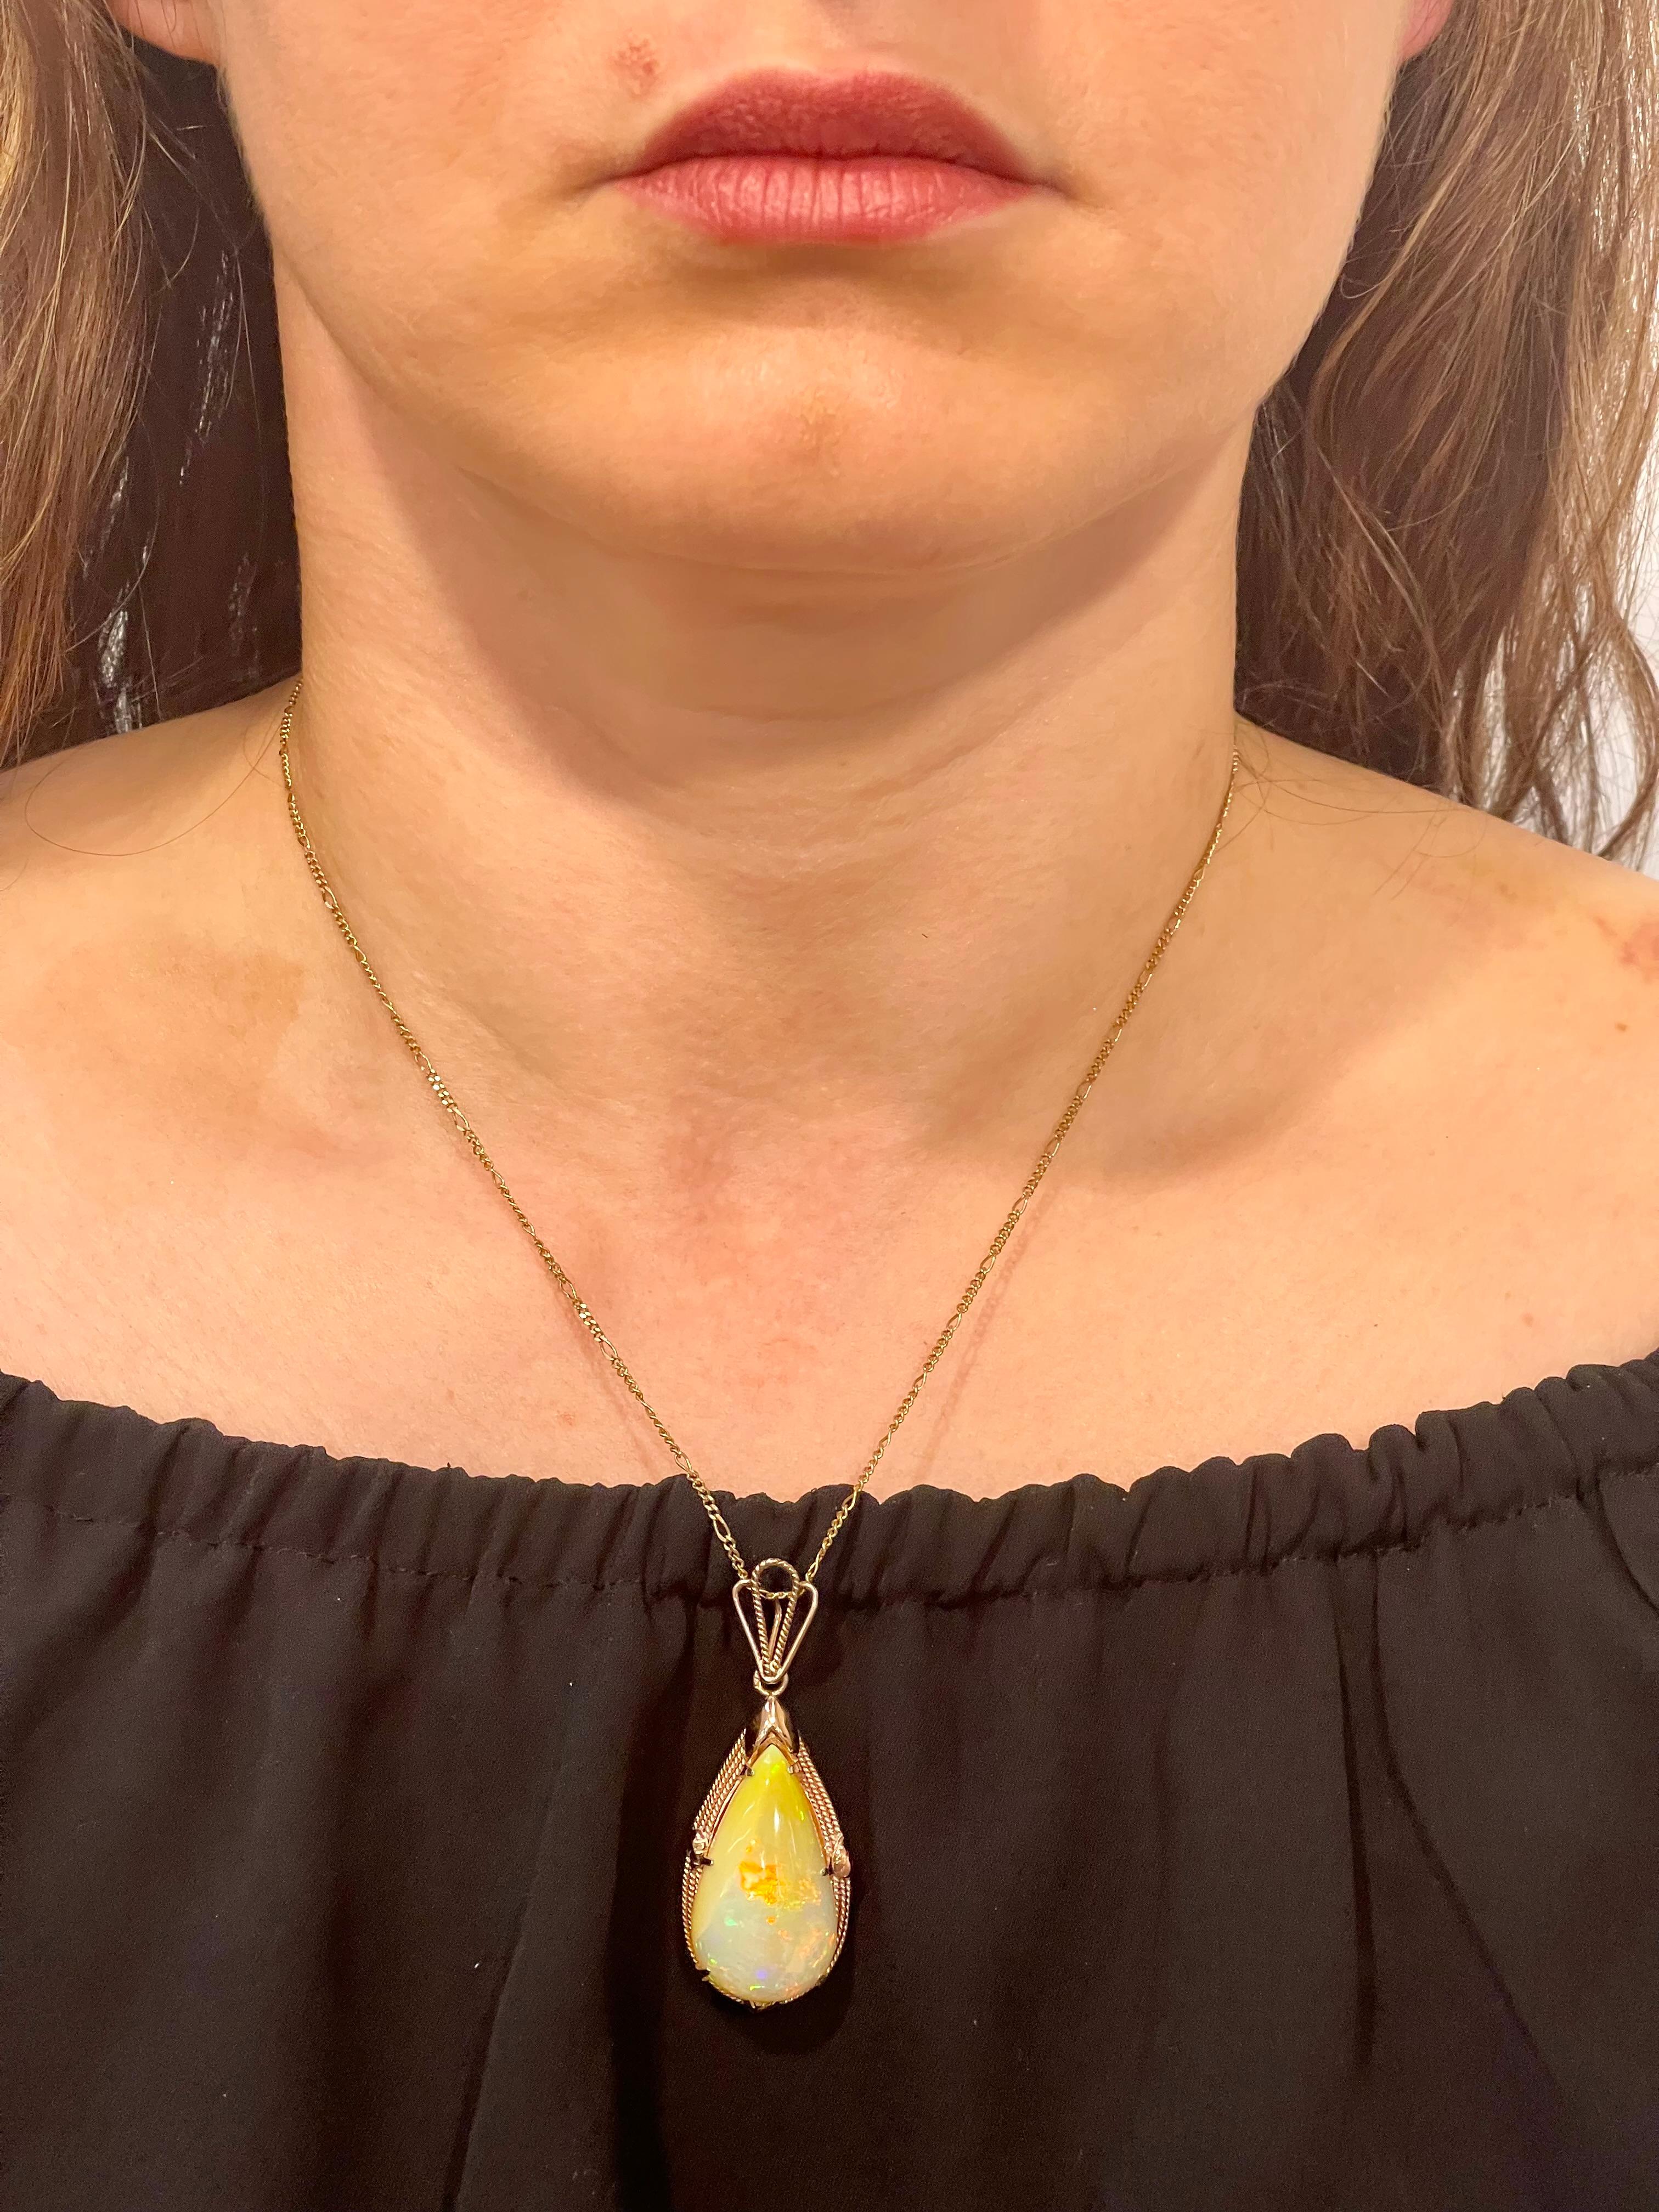 Approximately 18 Carat Pear Ethiopian Opal  Pendant / Necklace 14 Karat Yellow Gold Estate
This spectacular Pendant Necklace  consisting of a single Pear  Shape Ethiopian  Opal Approximately 18 Carat.  

14 Karat gold  10 Grams
The pendant comes